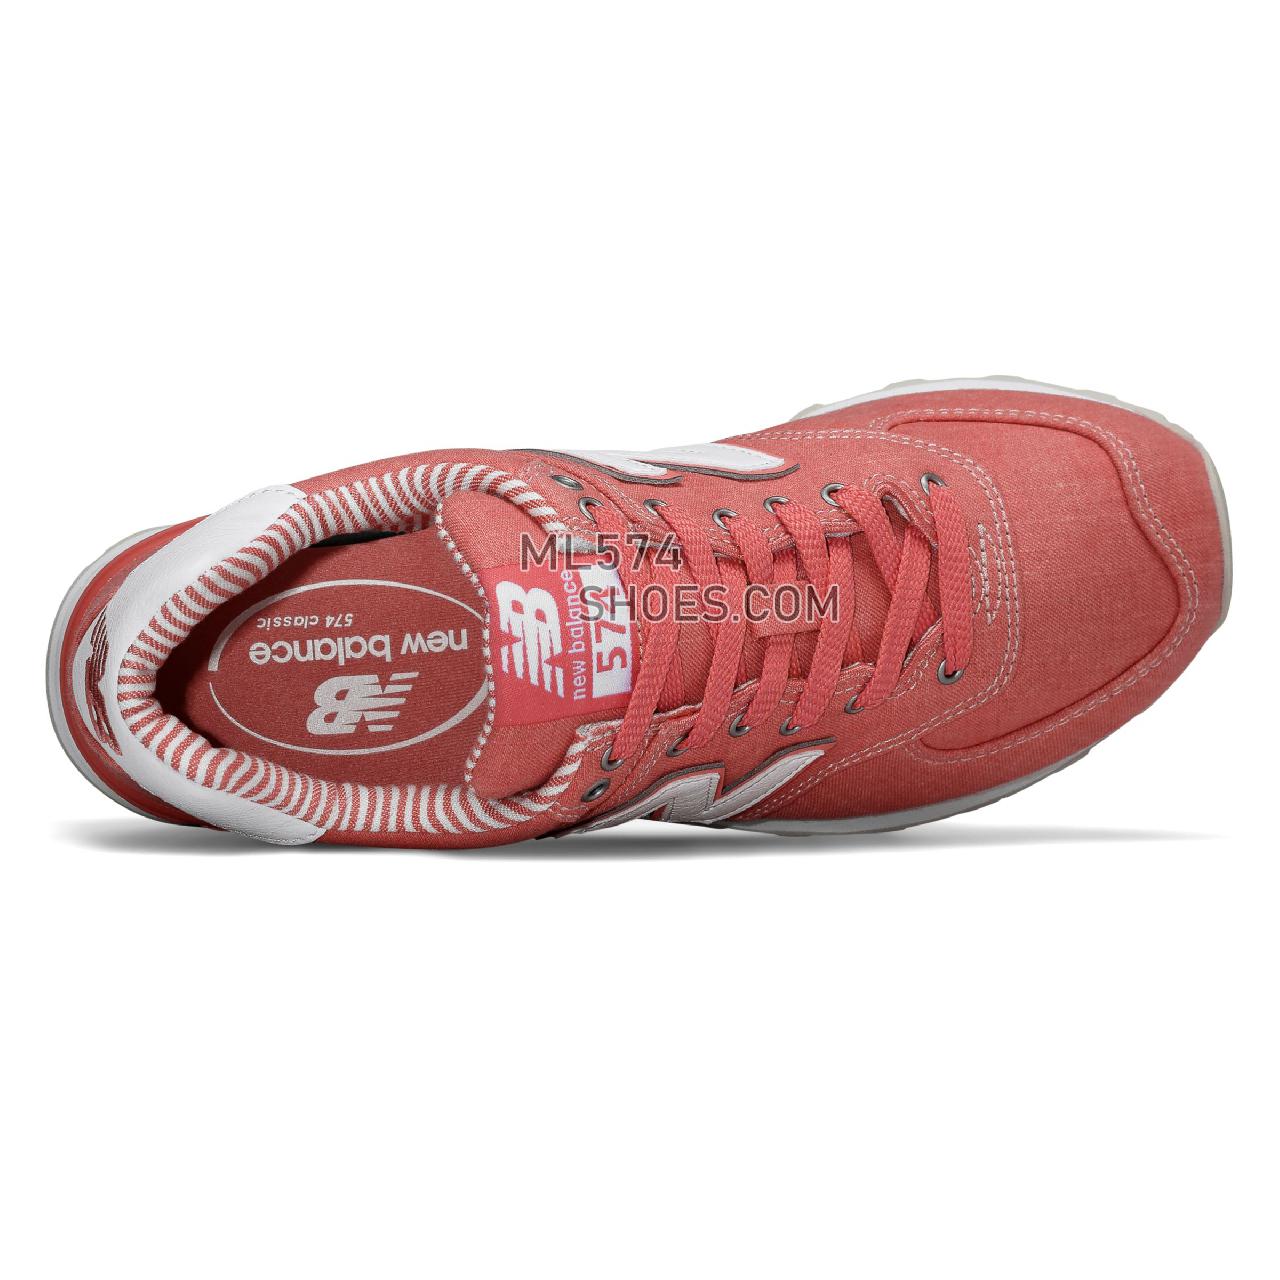 New Balance 574 Beach Chambray - Women's 574 - Classic Coral with White - WL574CHE